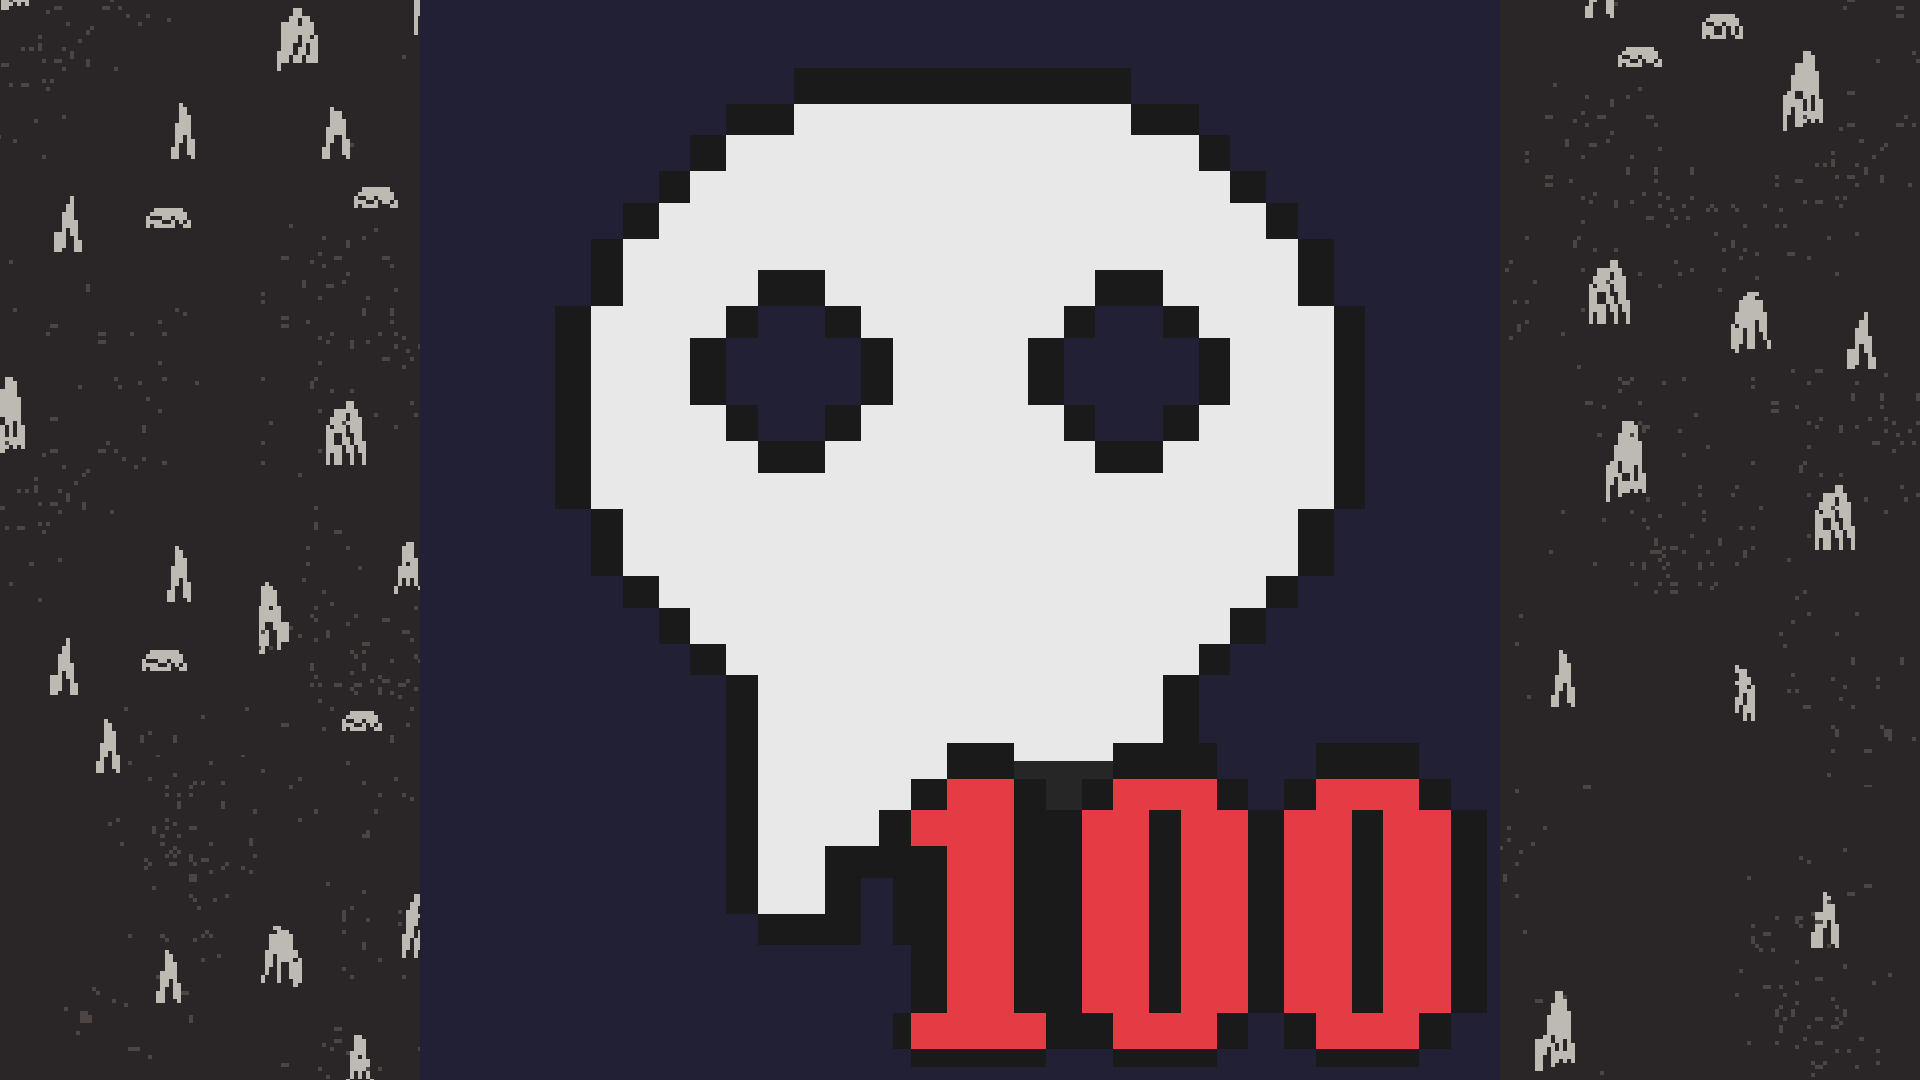 Icon for 100 Deaths